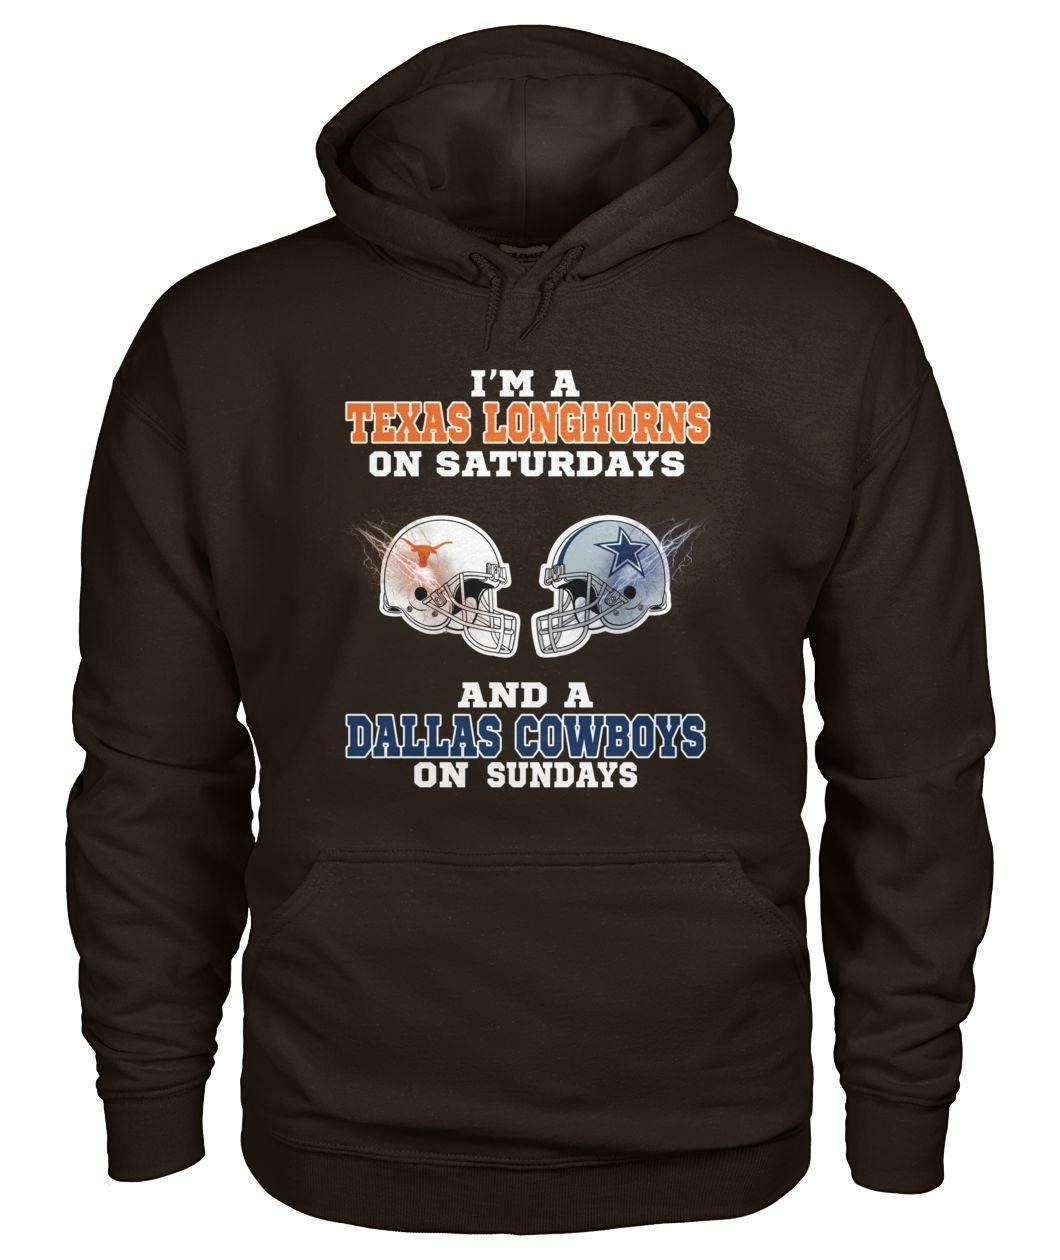 I'm Texas longhorn on Saturdays and Dallas Cowboys on Sunday shirt and hoodie